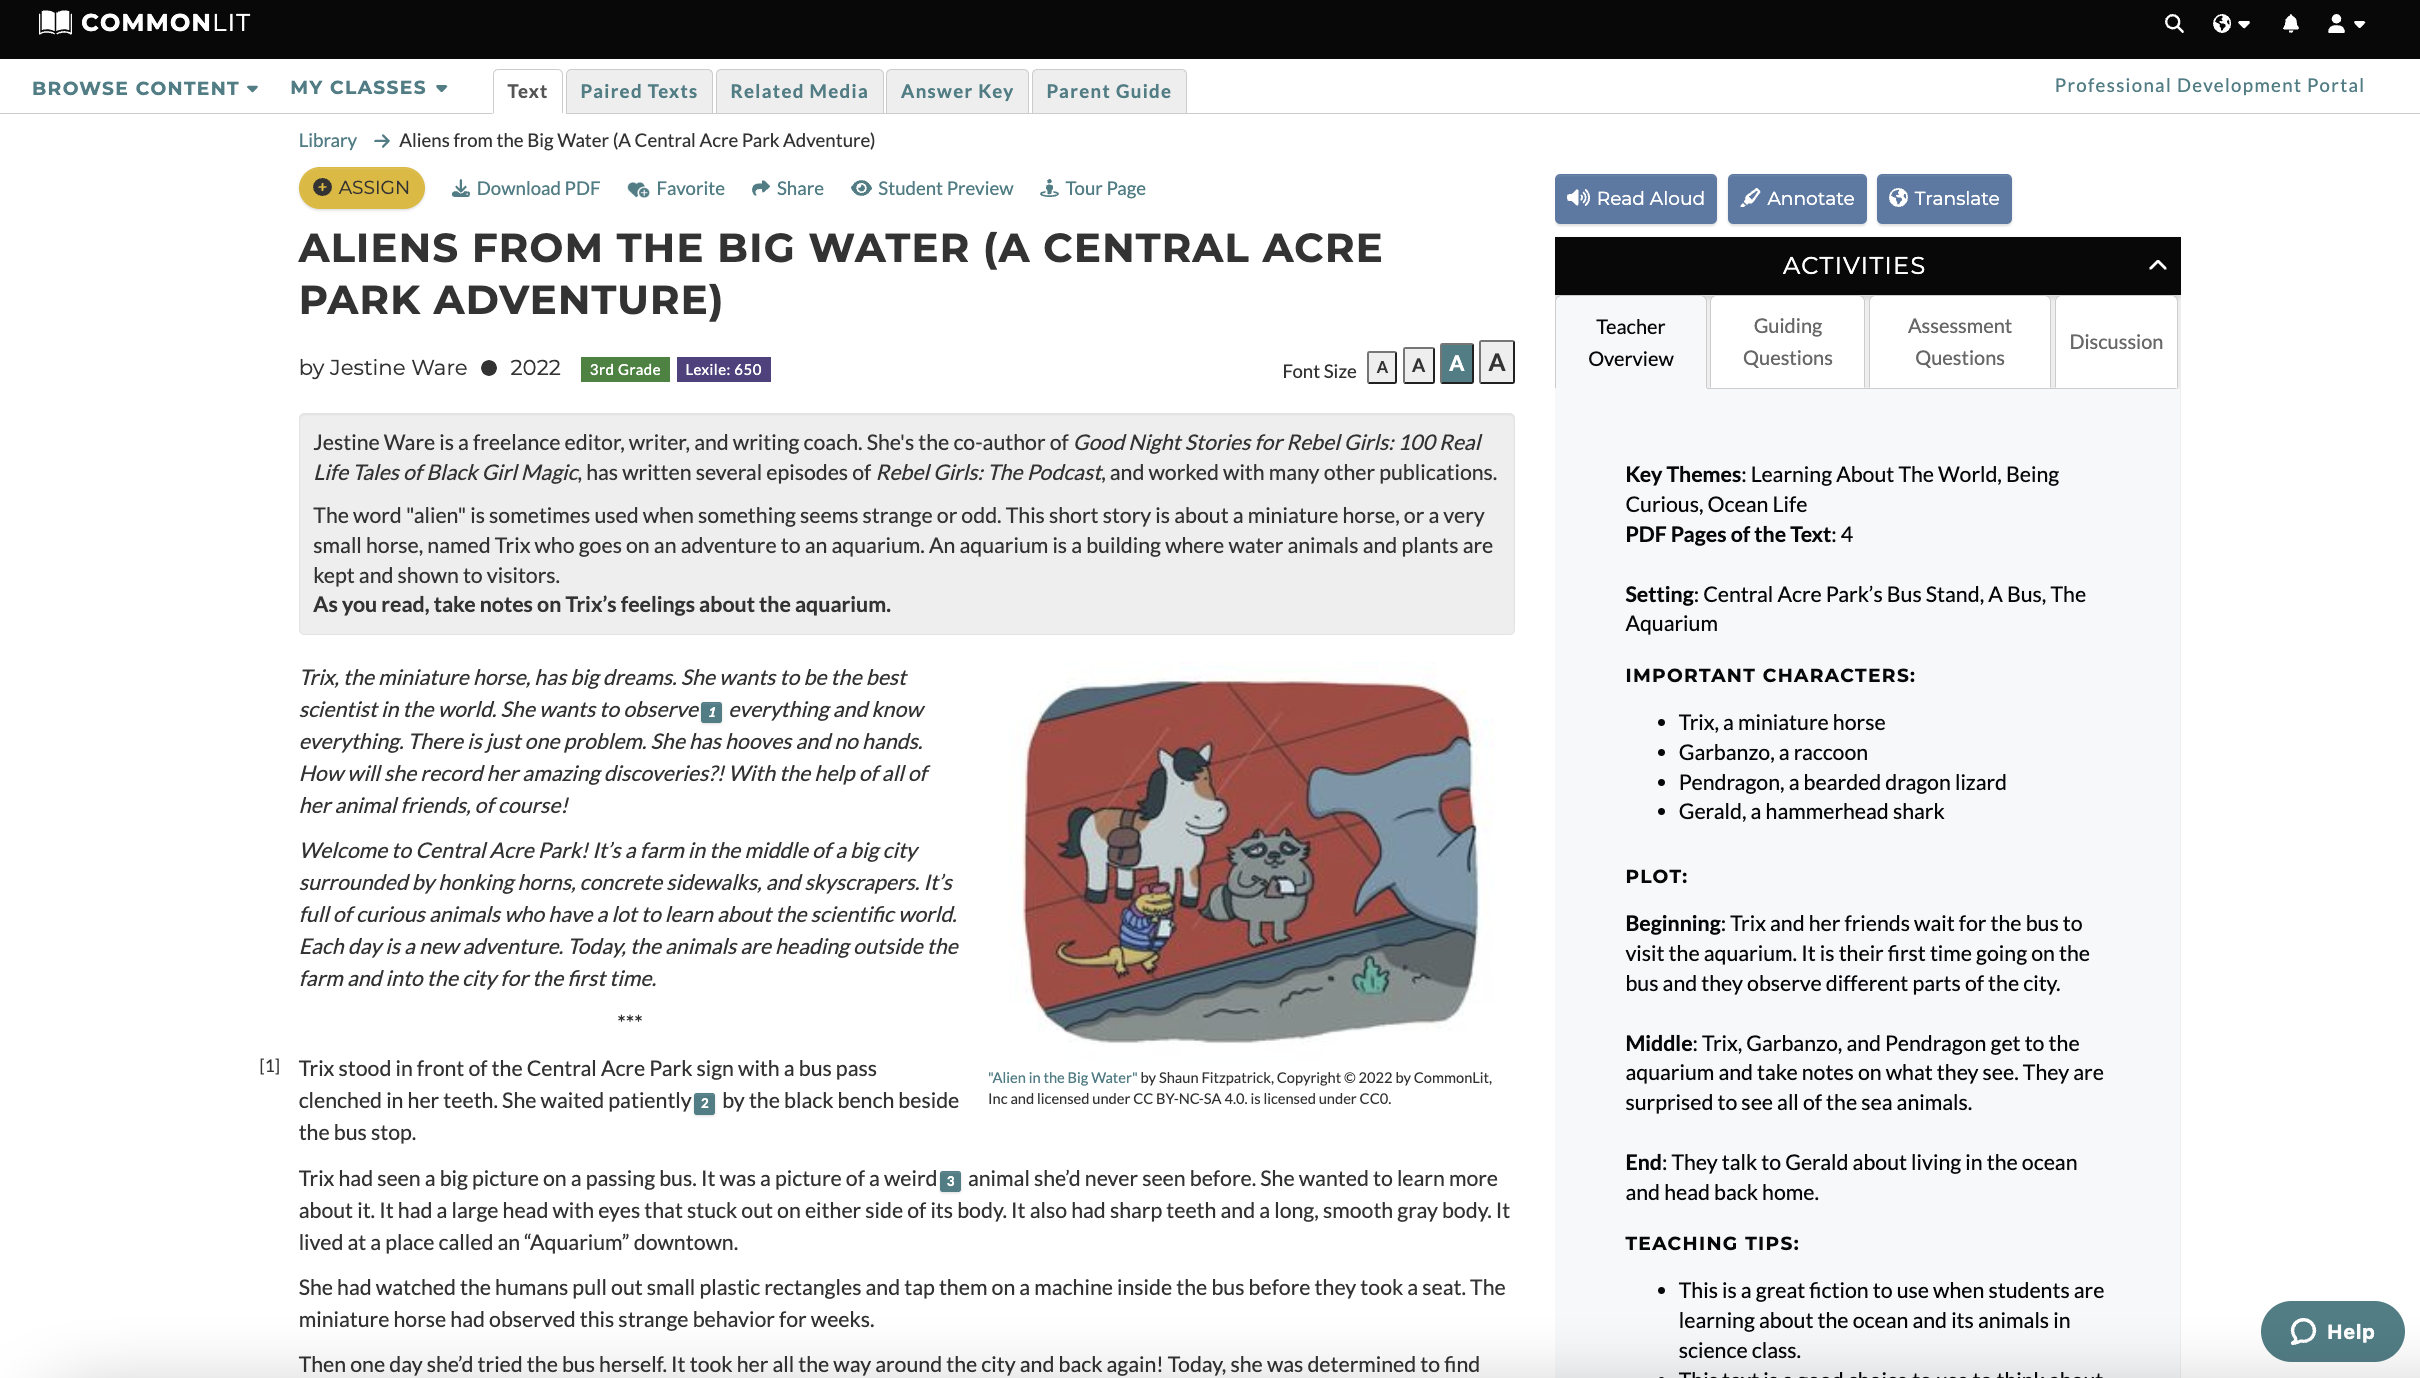 Screenshot of "Aliens from the Big Water" text on CommonLit